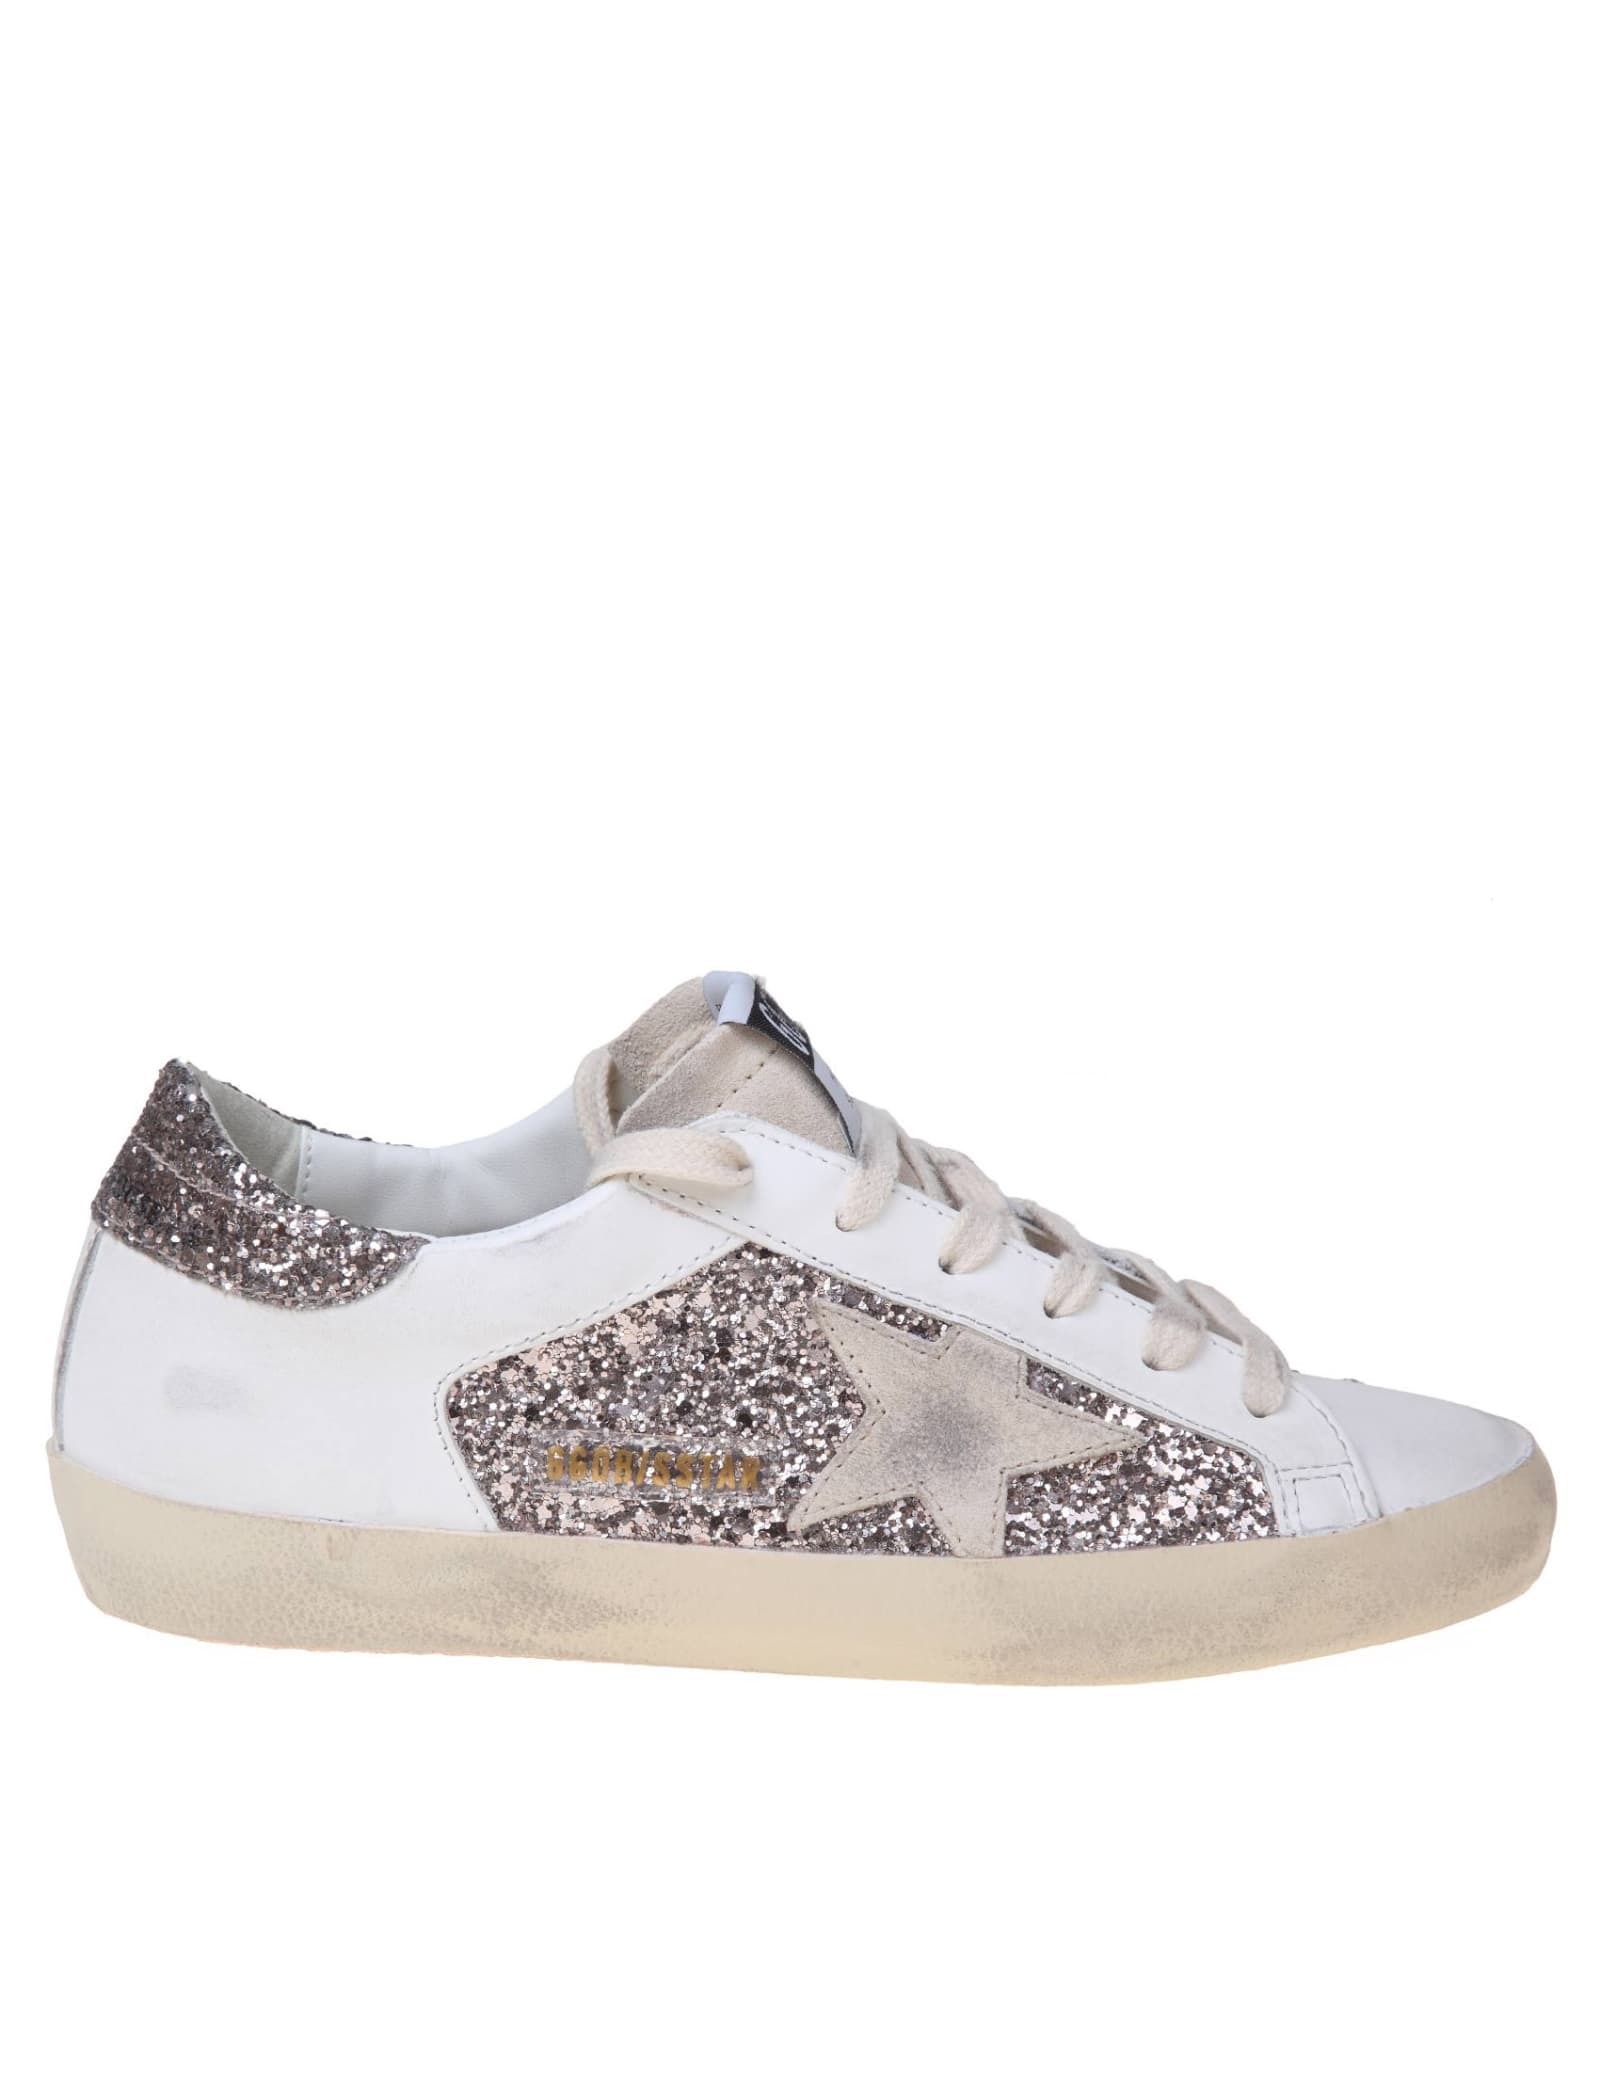 GOLDEN GOOSE GOLDEN GOOSE SUPER-STAR LEATHER SNEAKERS WITH GLITTER